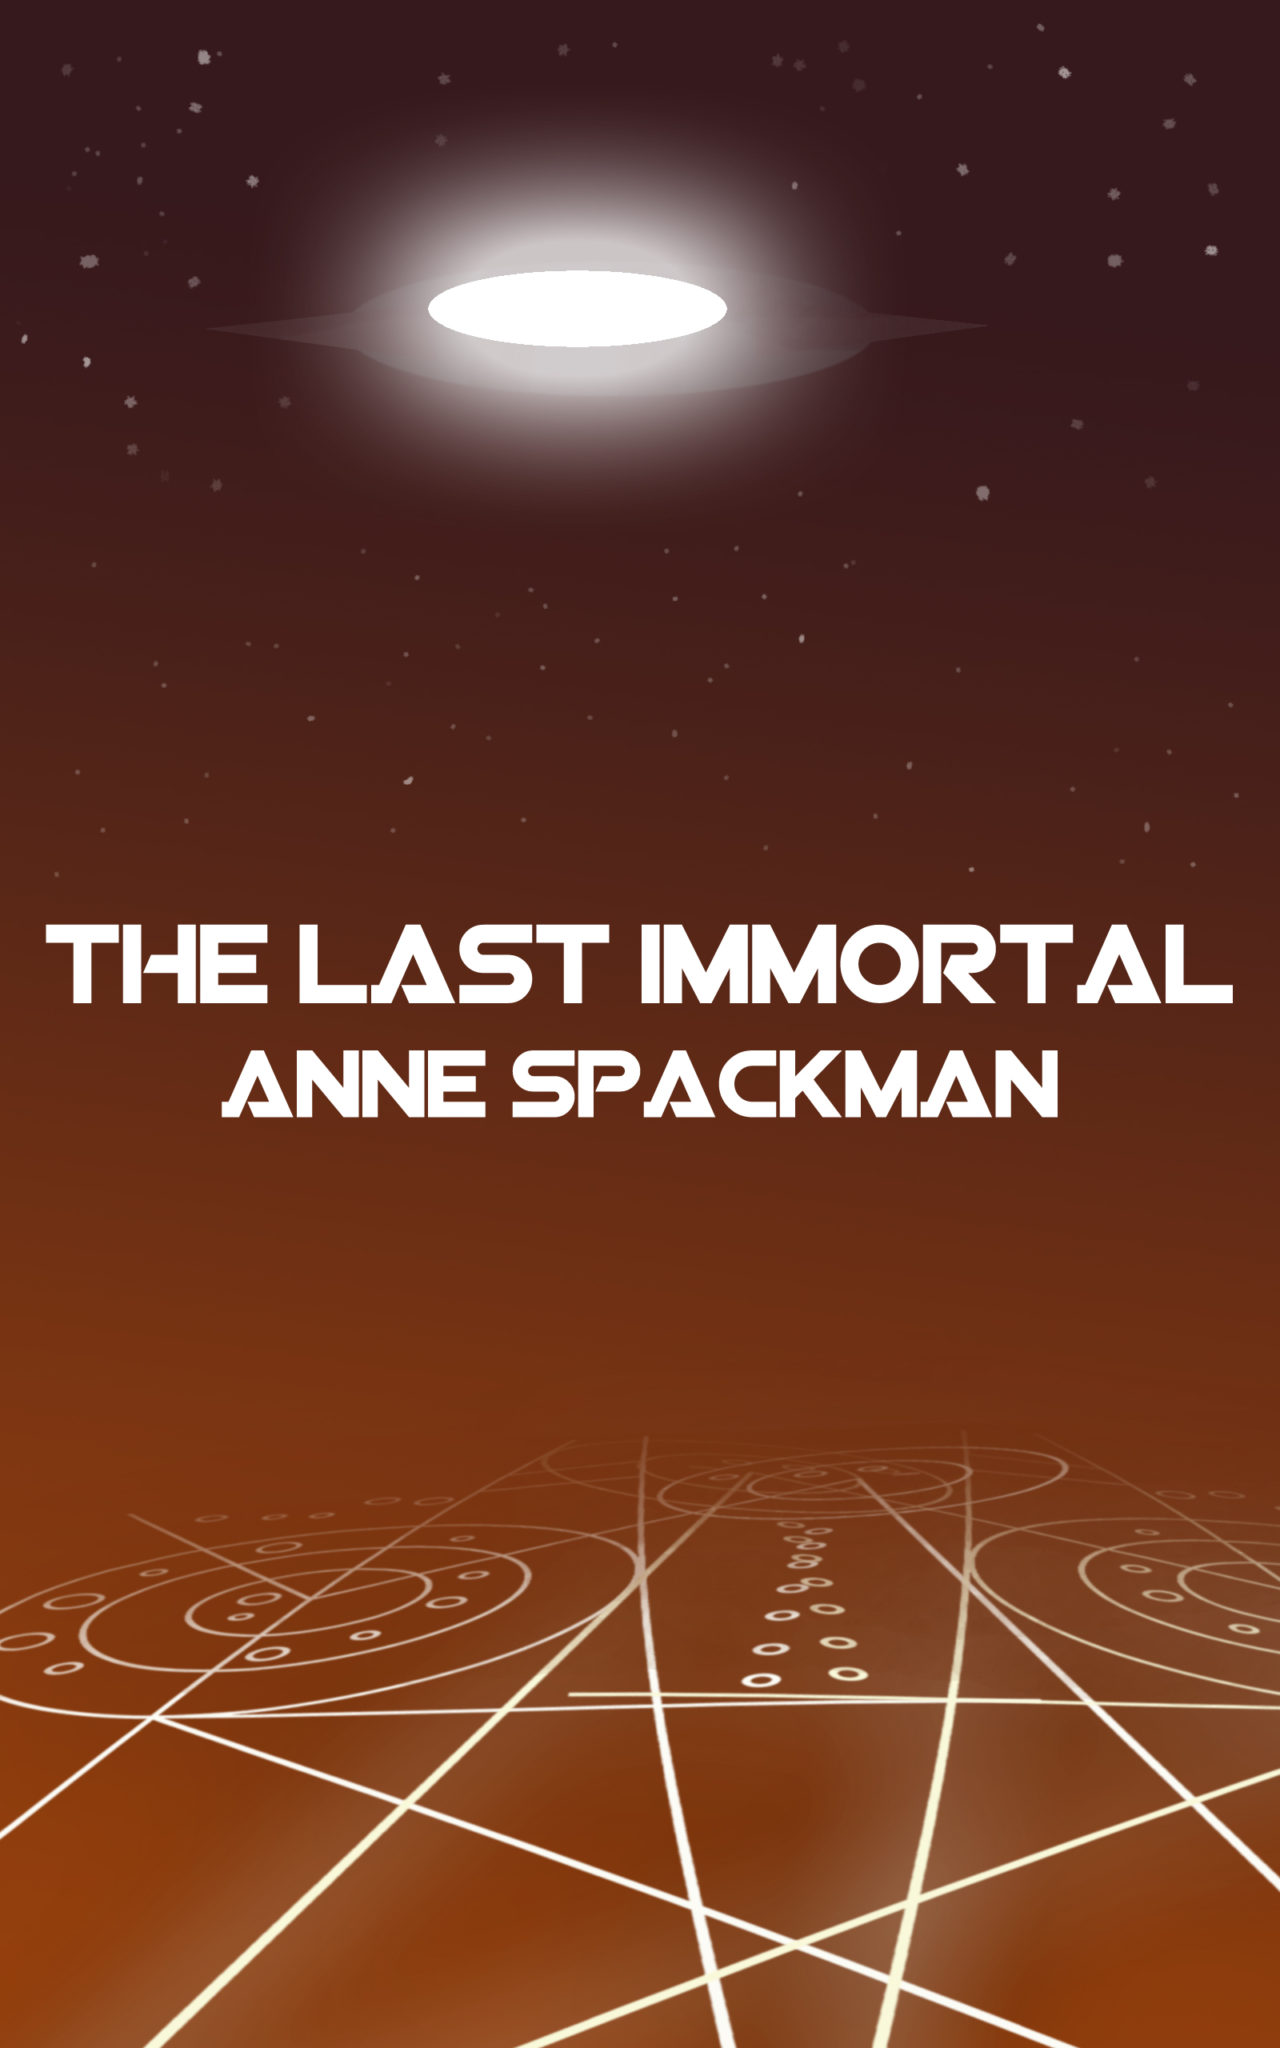 The Last Immortal by Anne Spackman